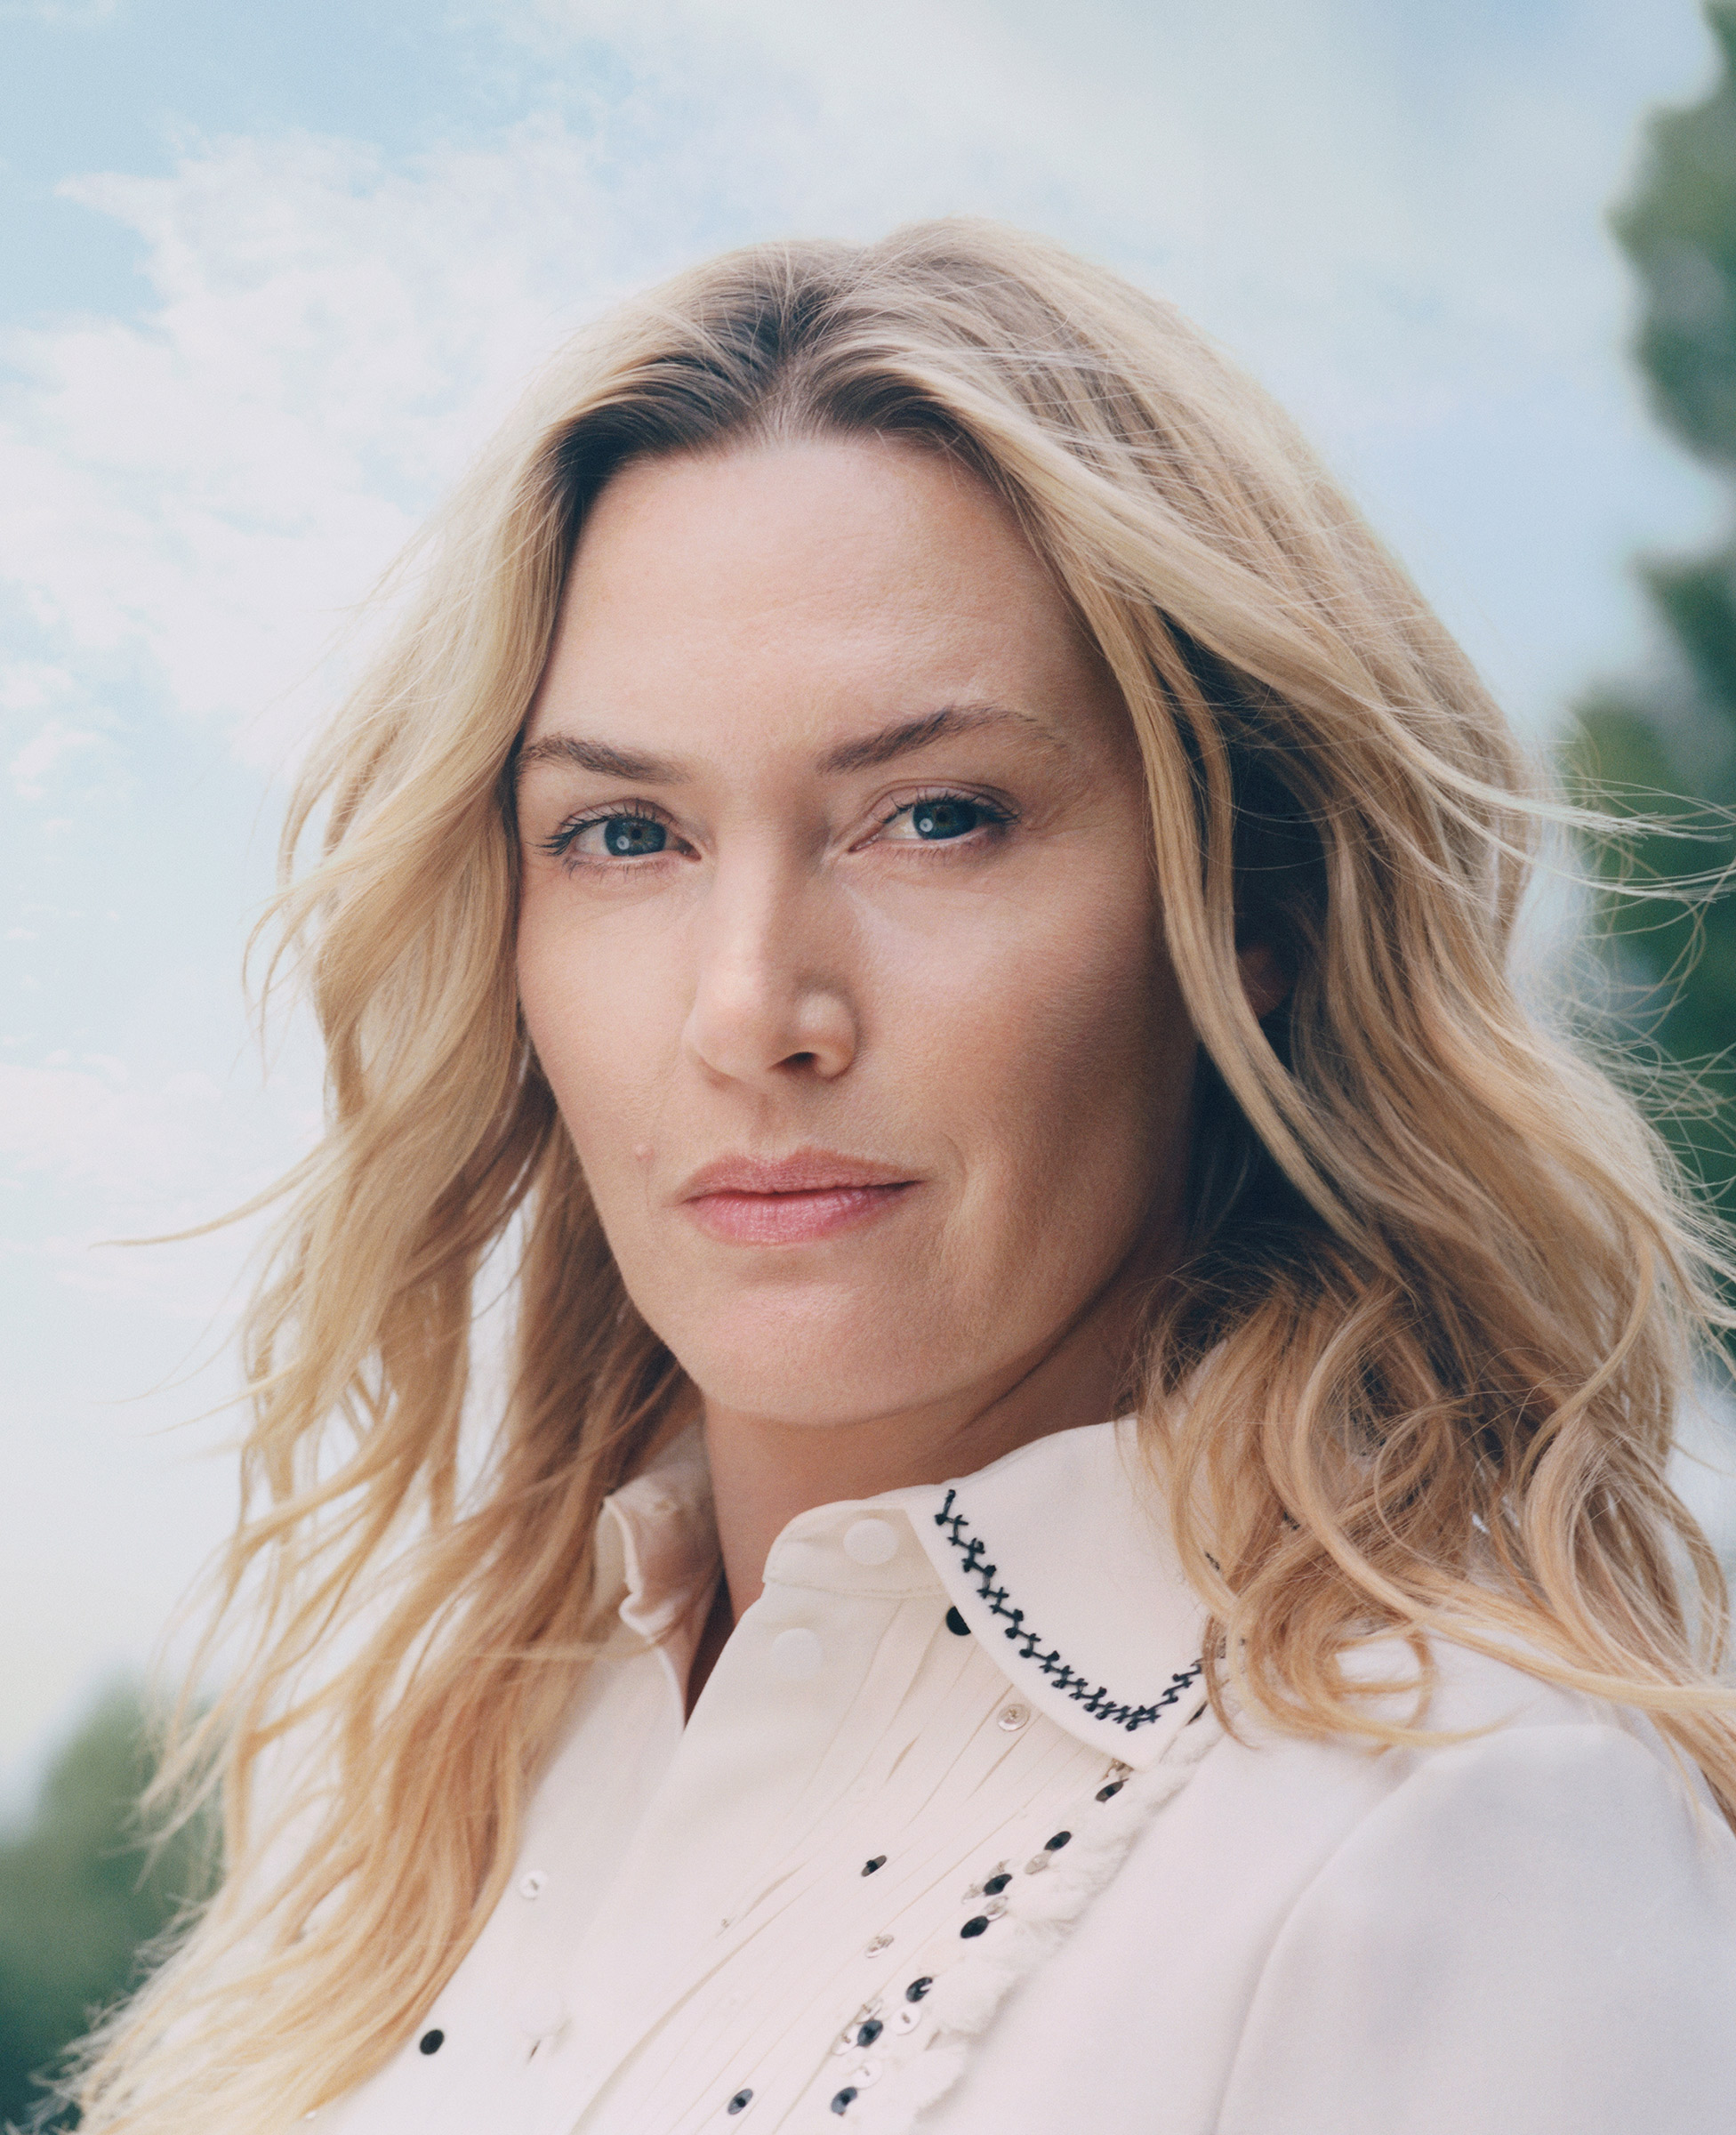 <strong>Kate Winslet</strong>. "<a href="https://time.com/collection/100-most-influential-people-2021/6095927/kate-winslet/">The 100 Most Influential People</a>," Sept. 27 issue. (Mark Peckmezian for TIME)